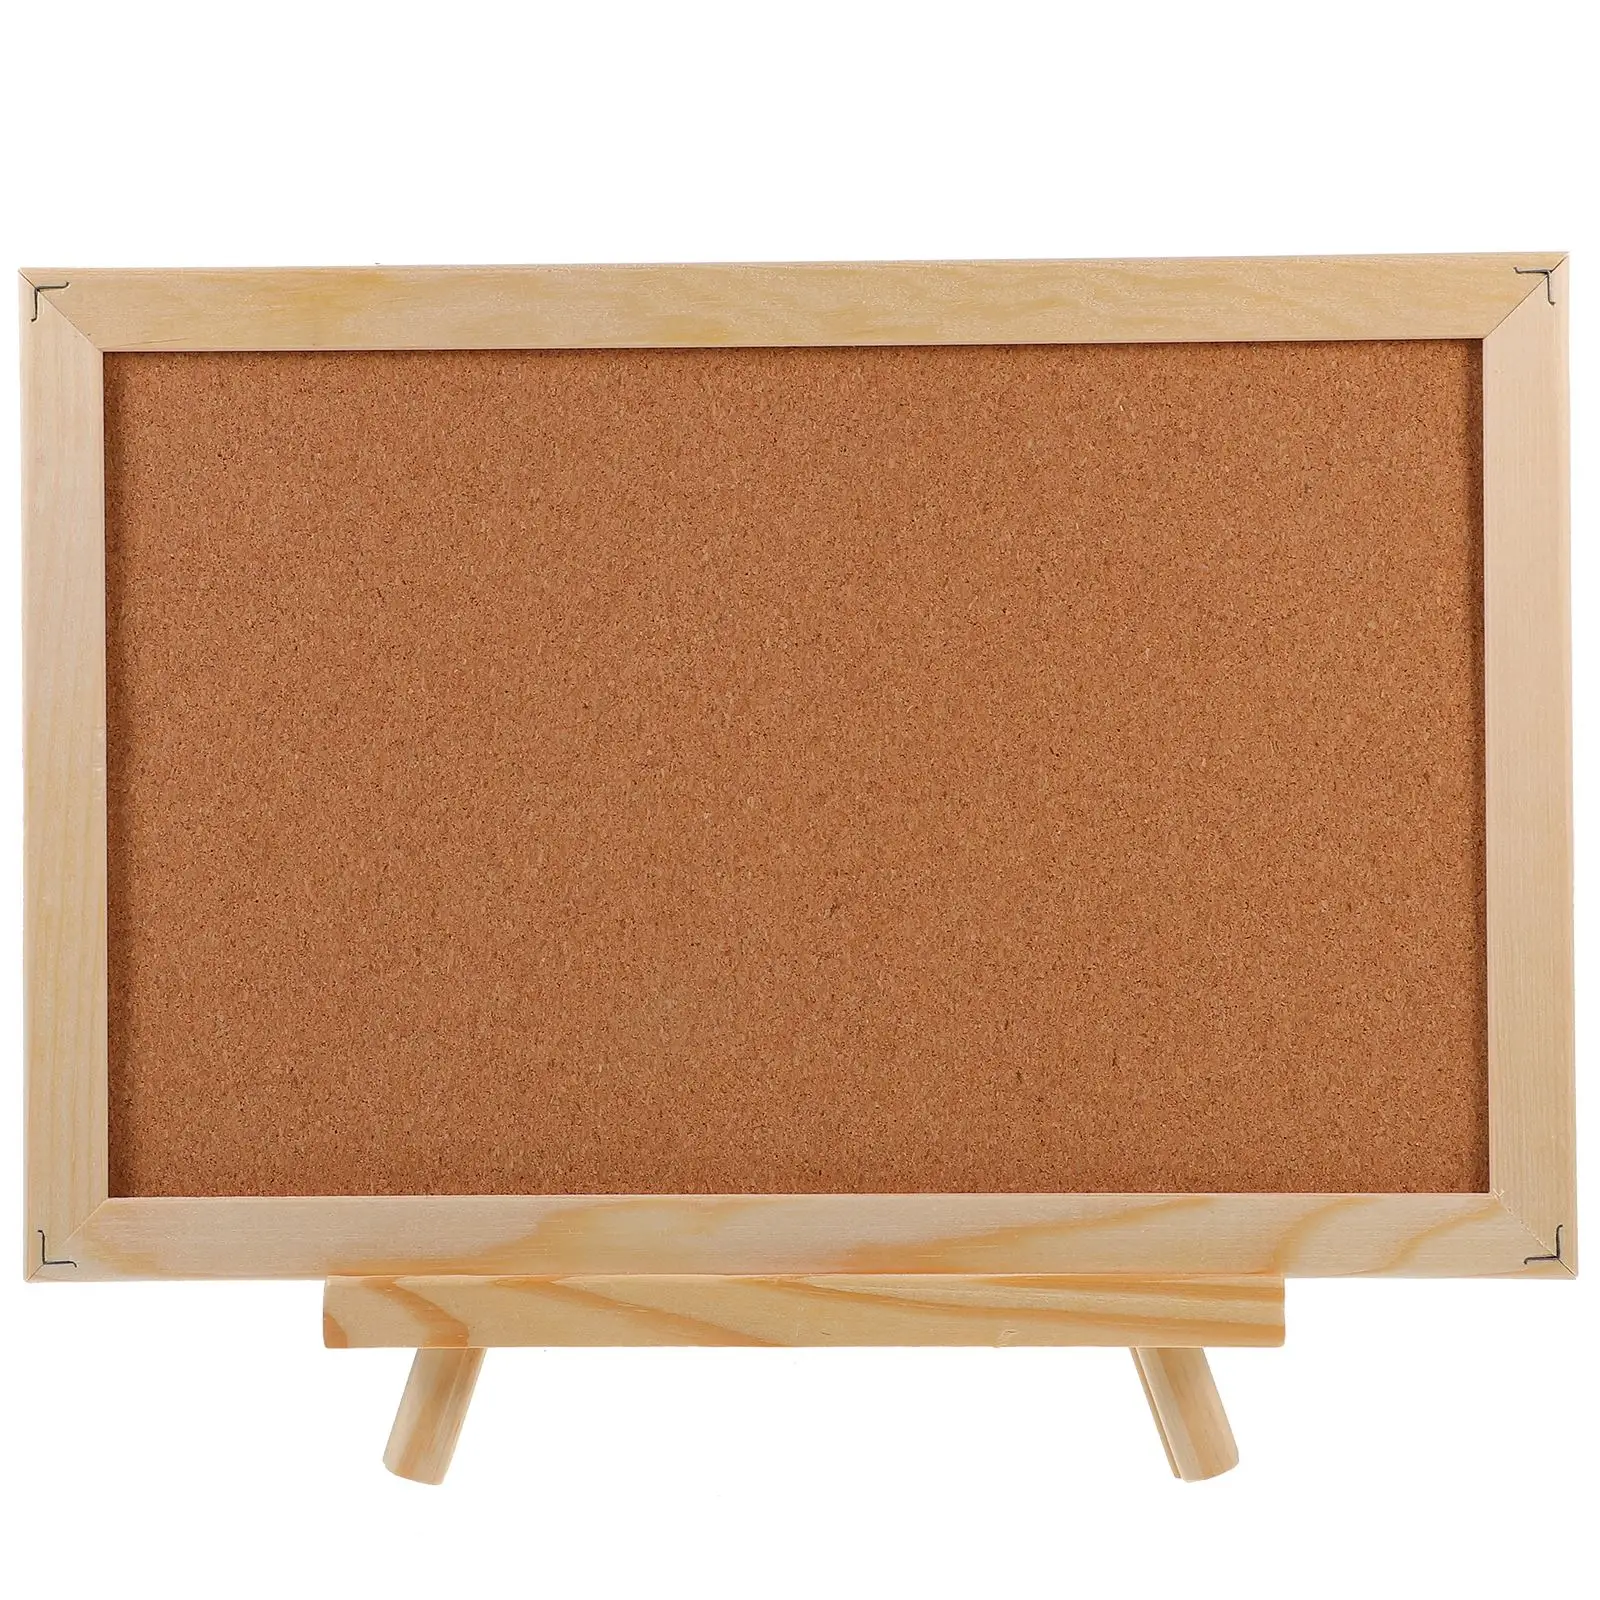 Durable Cork Wood Wall Hanging Message Bulletin Board Frame Notice Note Memo Board For Home Office Shop School Photo Background sviao a4 a5 solid wood hanging wall qualification honor acrylic photo frame punch free spot